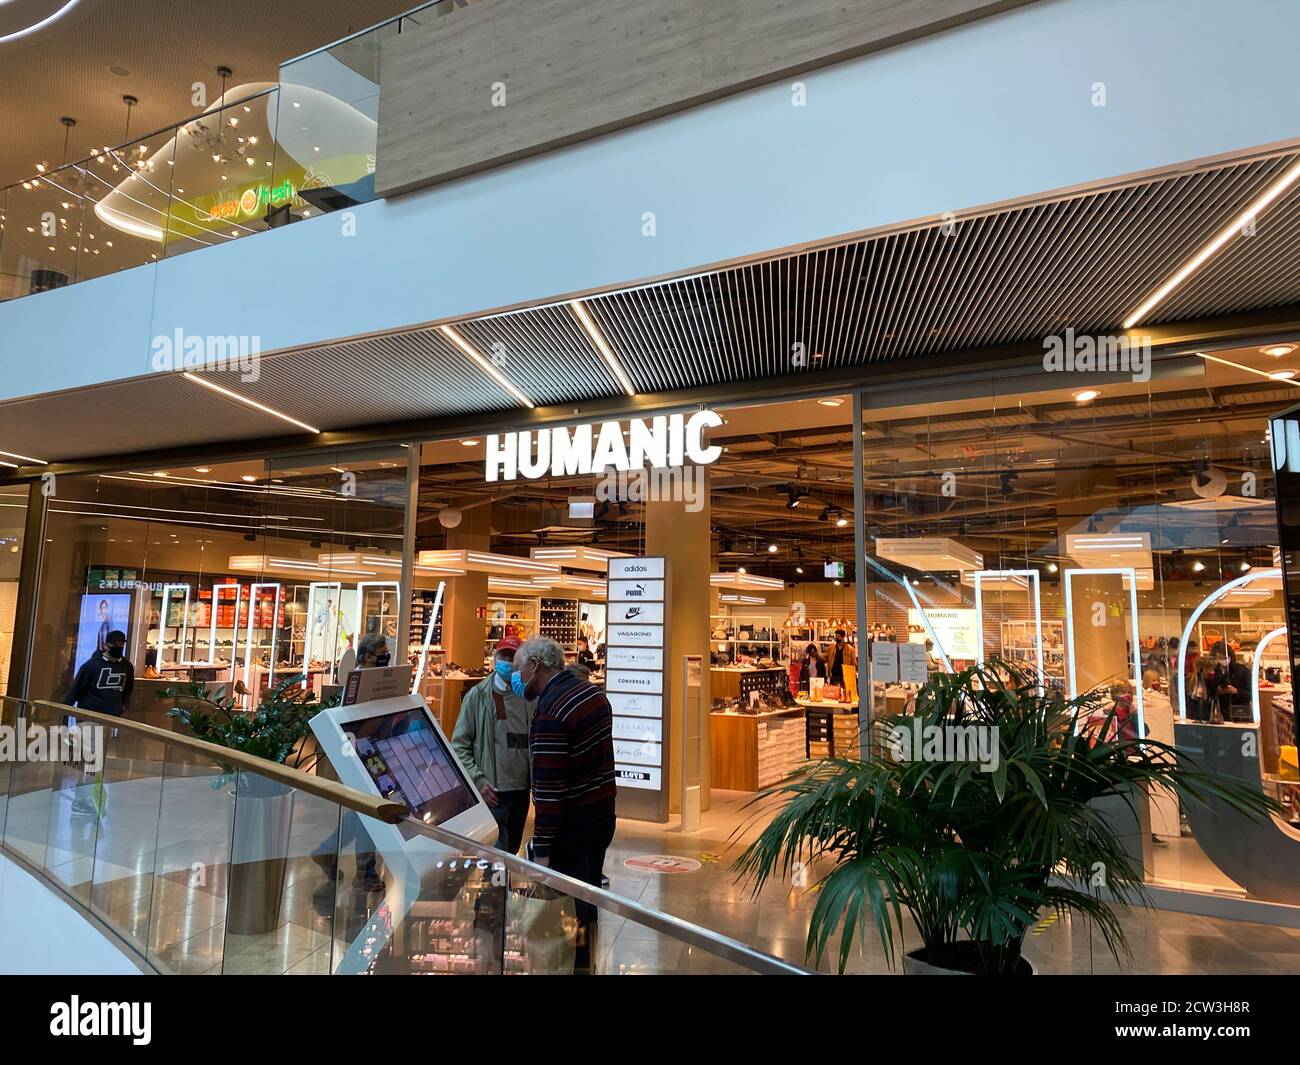 Monchengladbach, Germany - September 9. 2020: View on Humanic shoe fashion  store front inside Minto shopping mall Stock Photo - Alamy